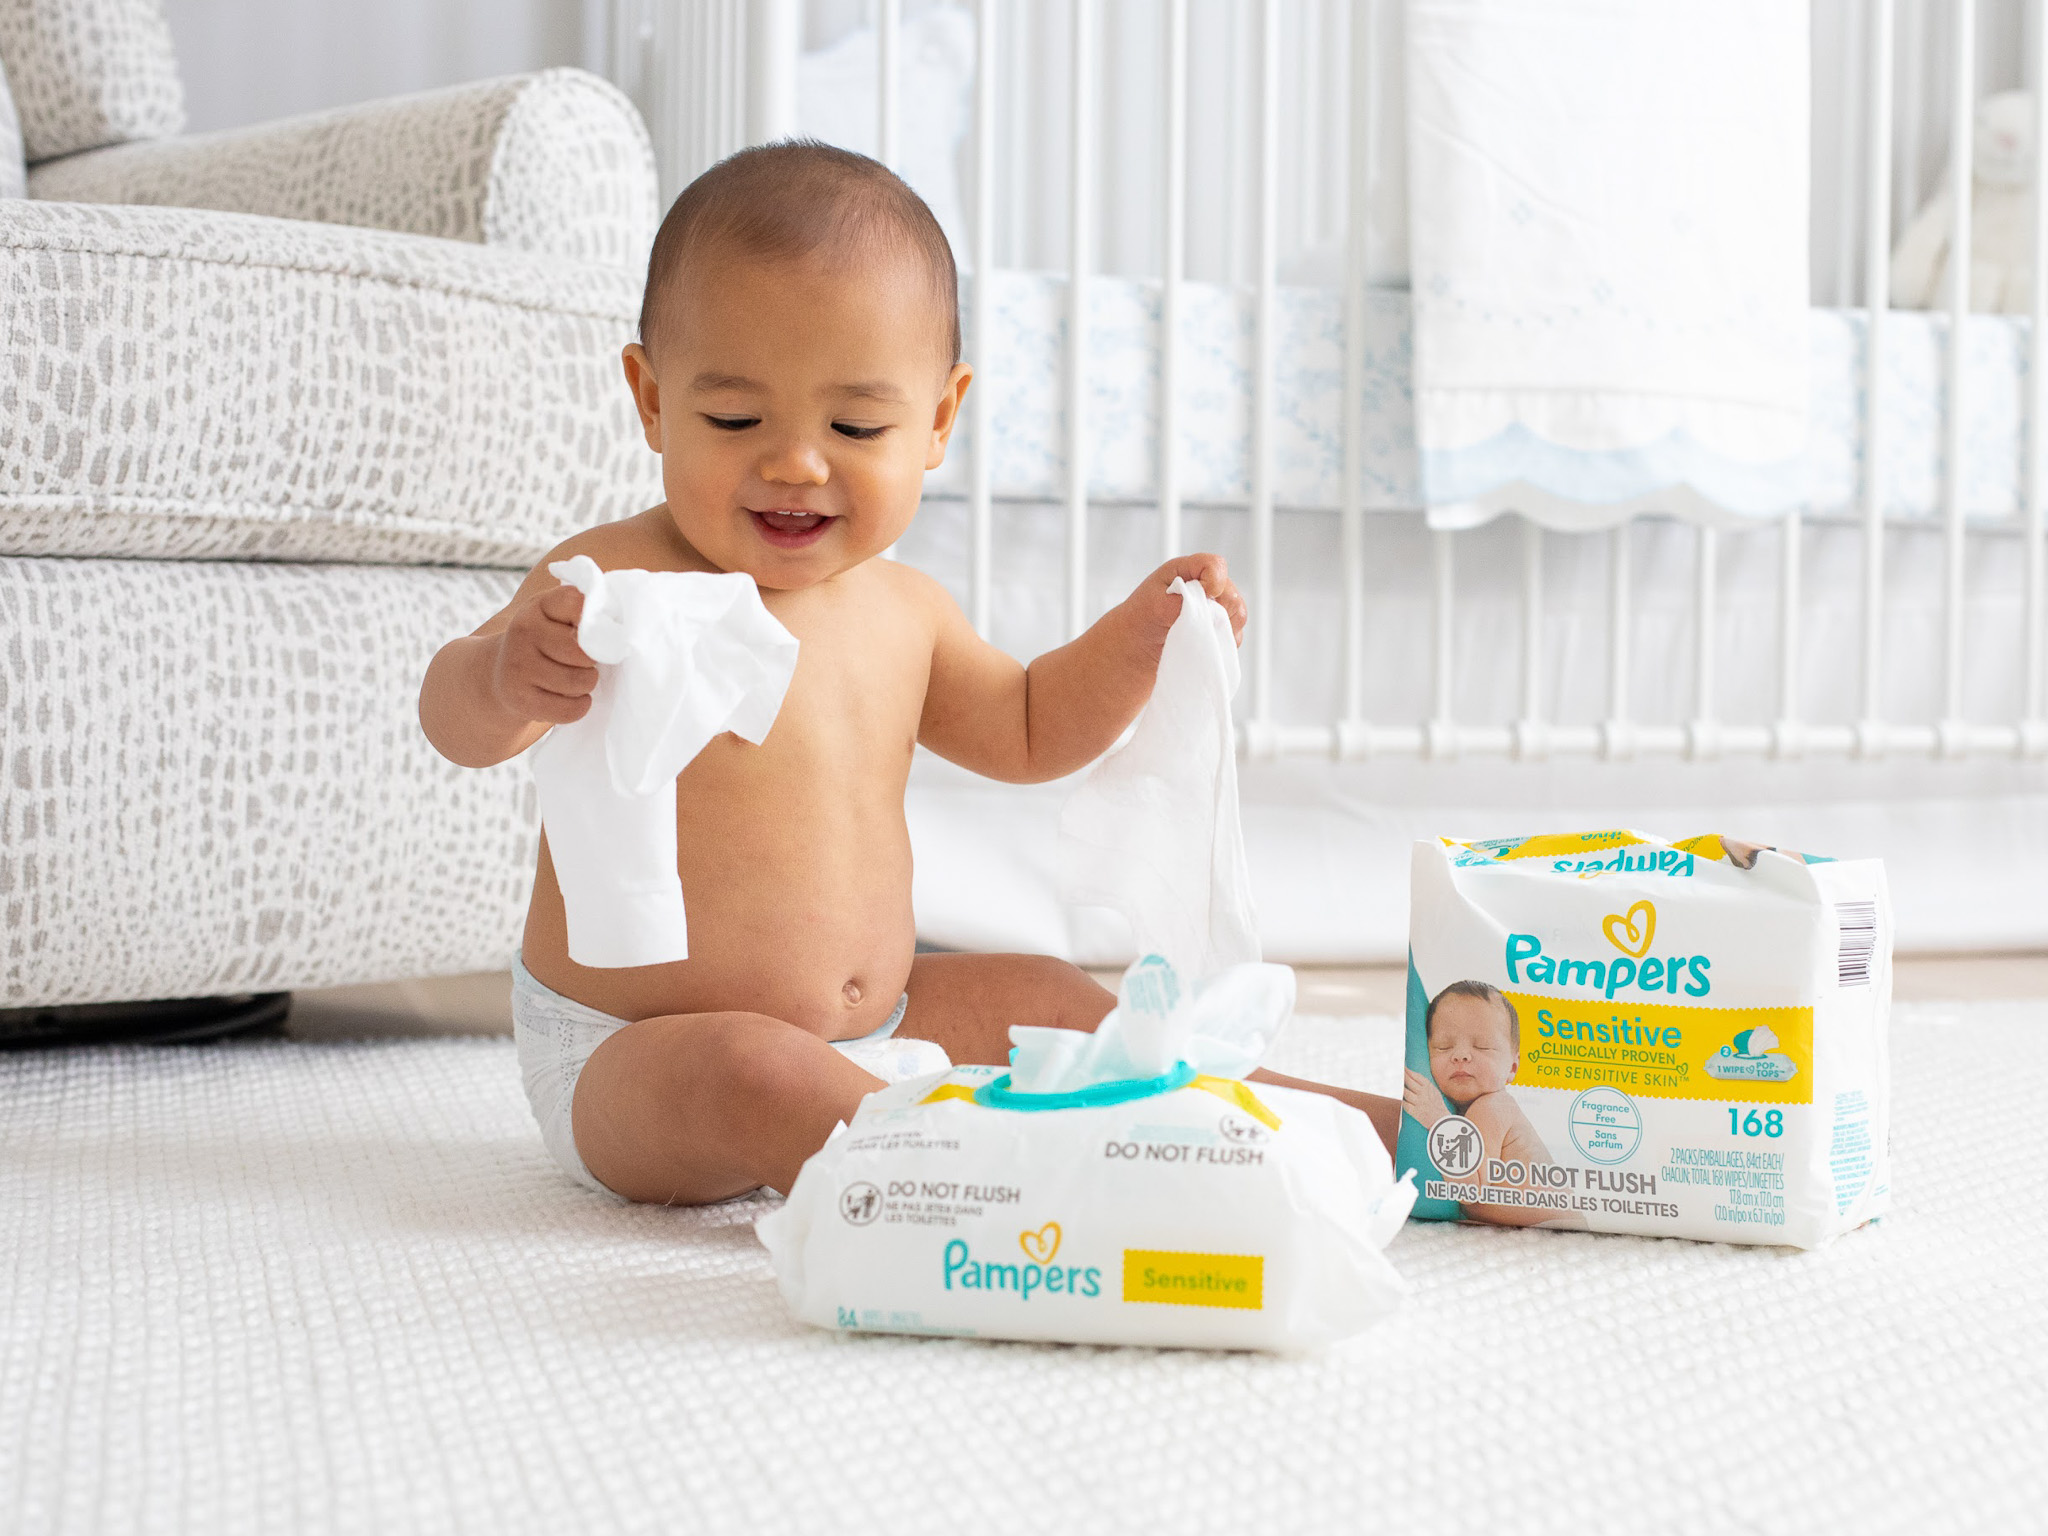 Get A Pack Of Pampers Wipes For Just $1.49 At Publix